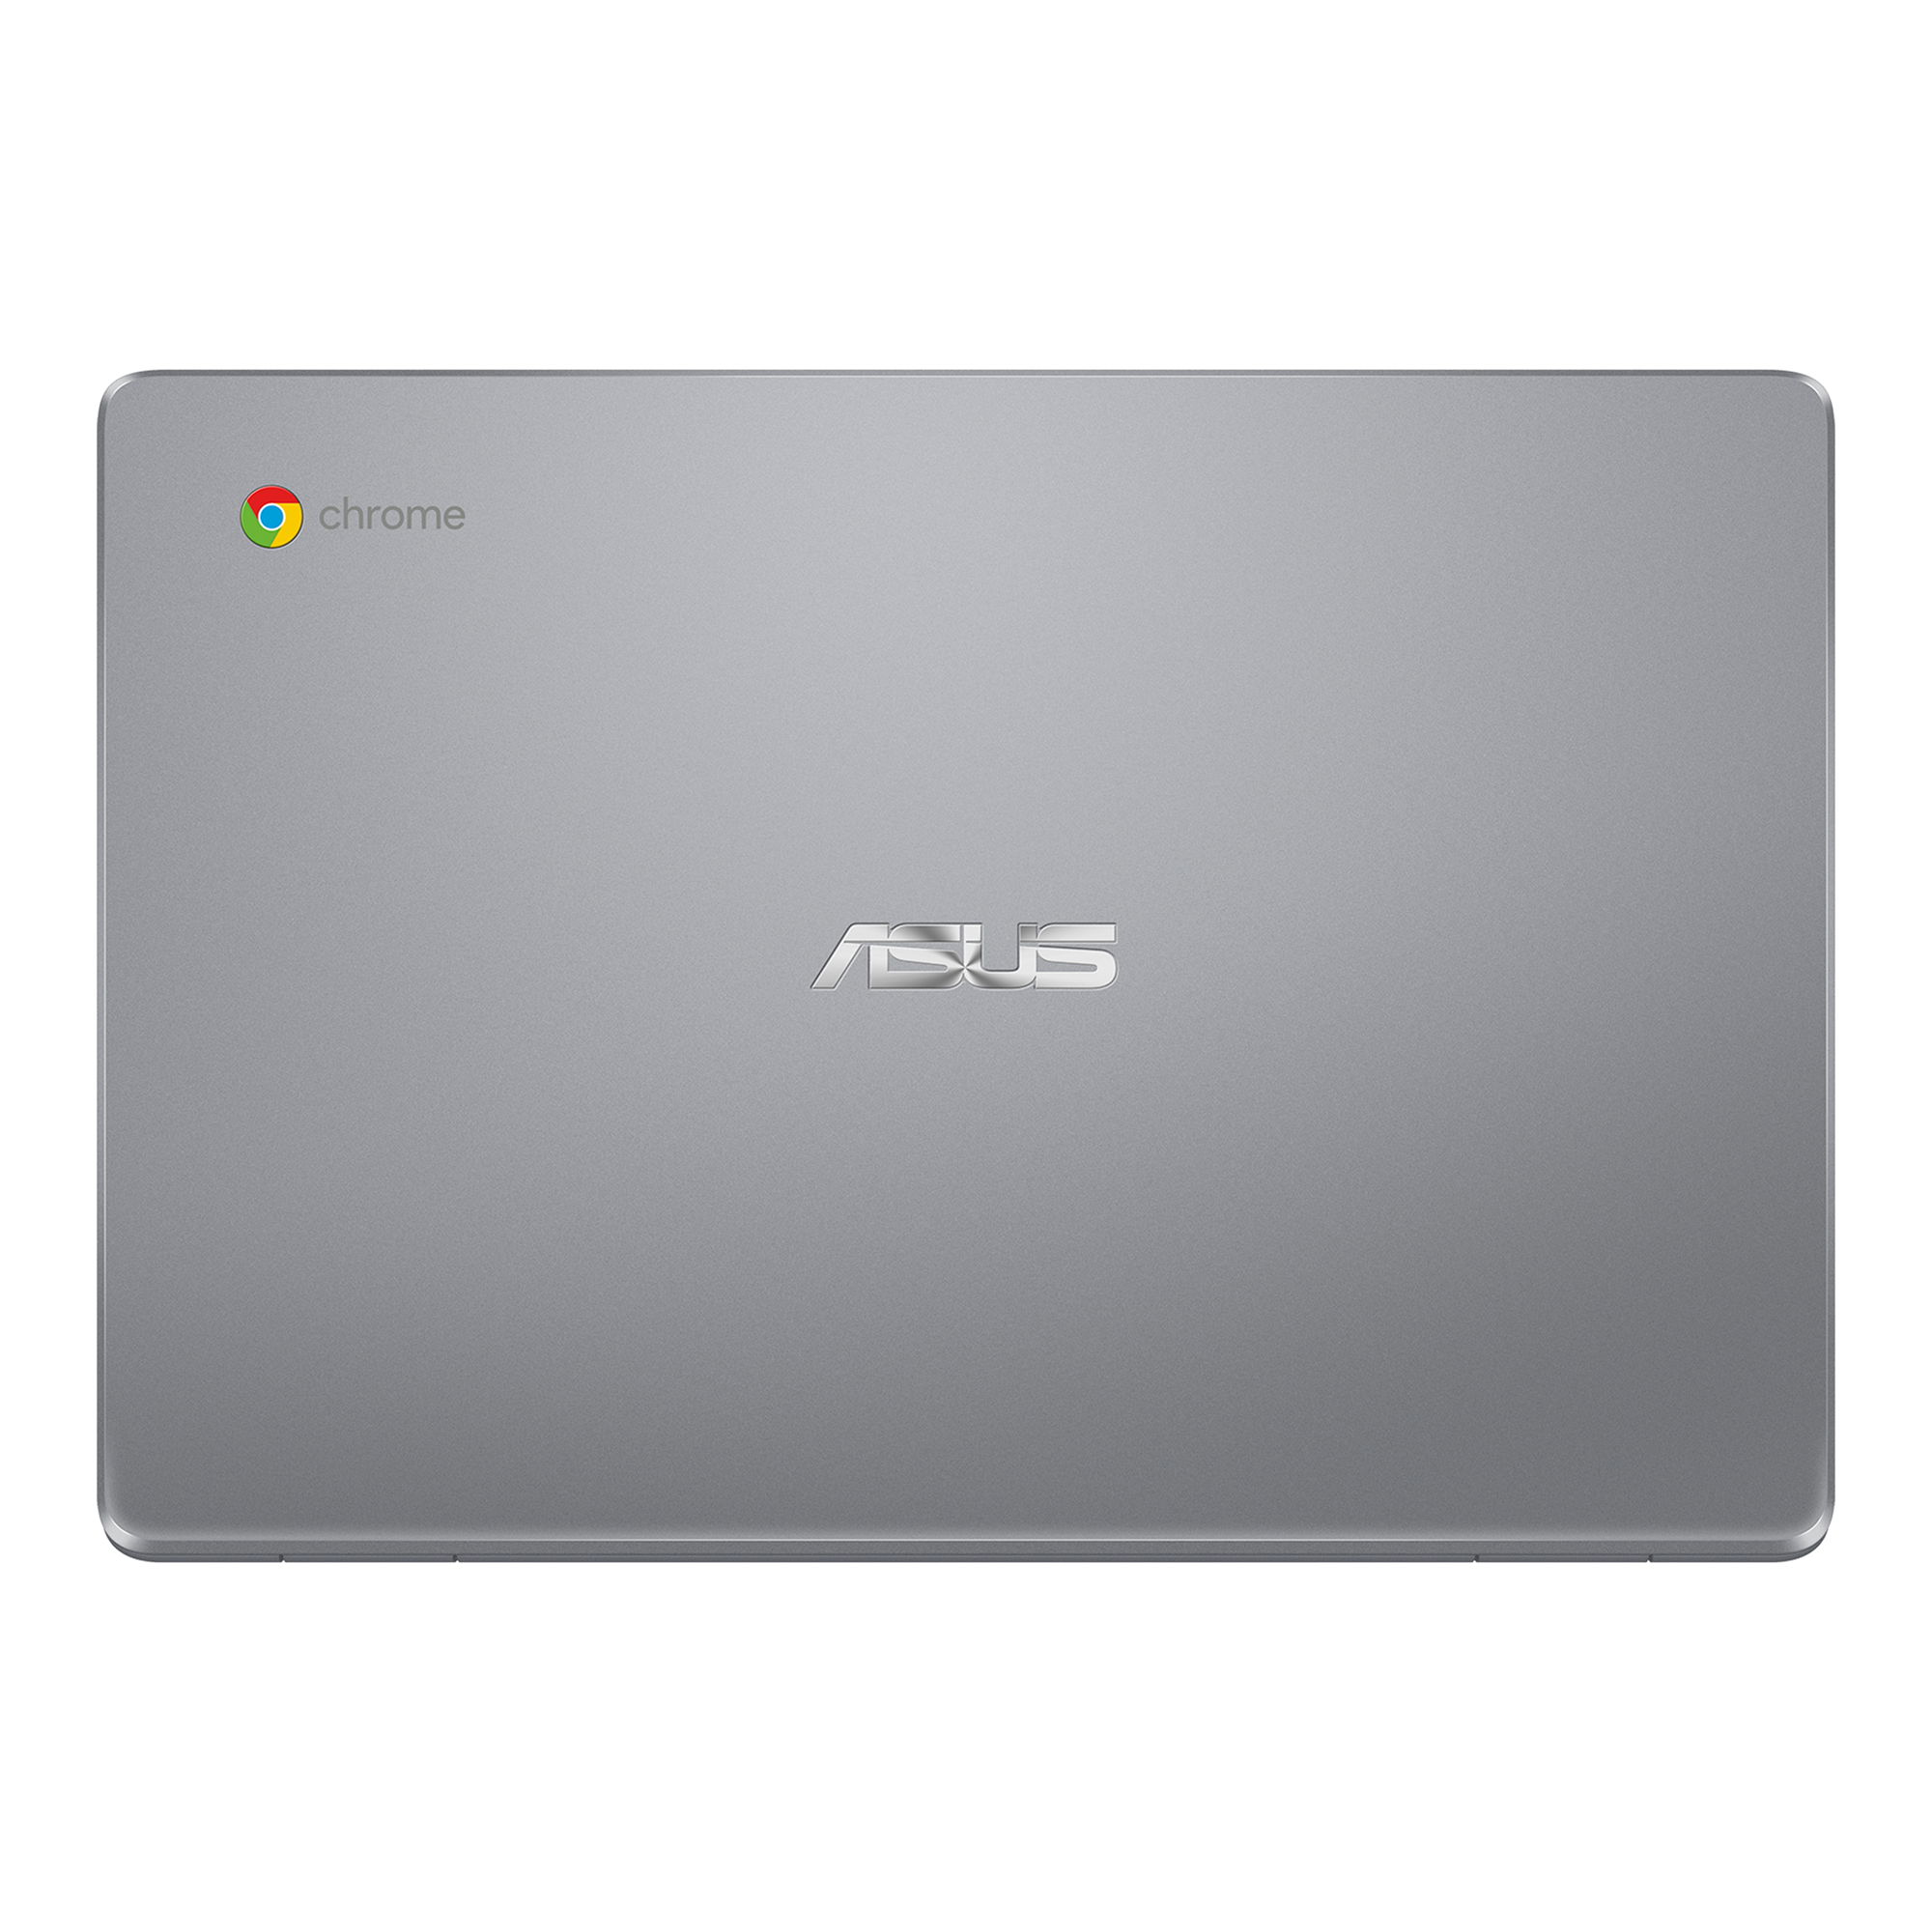 ASUS Chromebook C425｜Laptops For Home｜ASUS USA